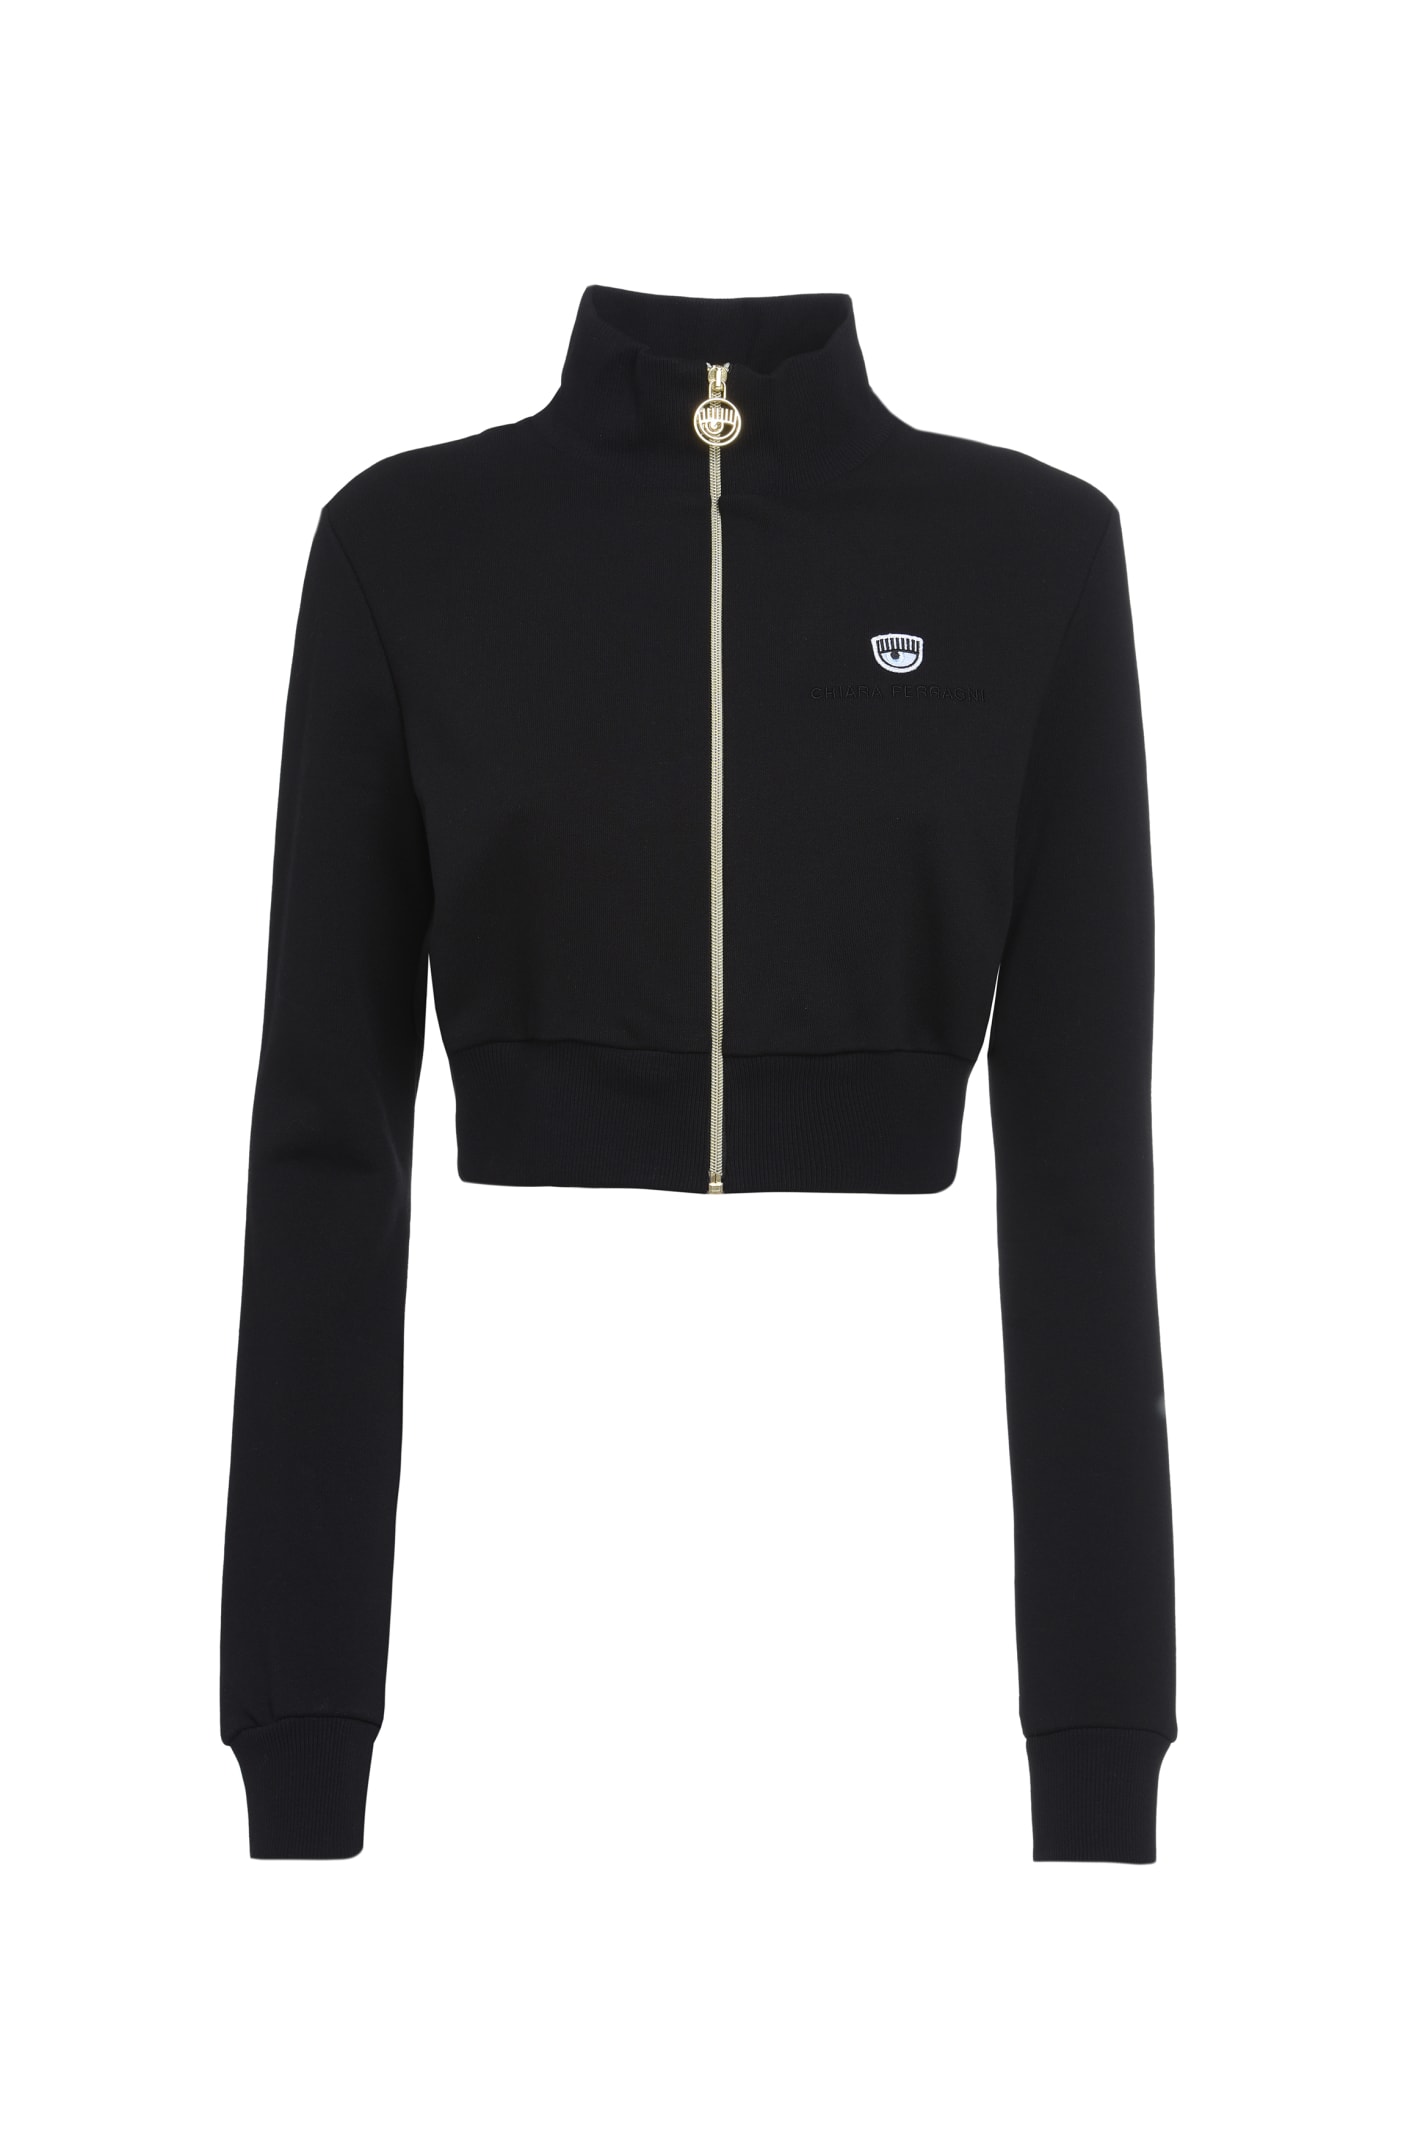 Chiara Ferragni Long-sleeved Form-fitting Cropped Tracksuit Top With Logo